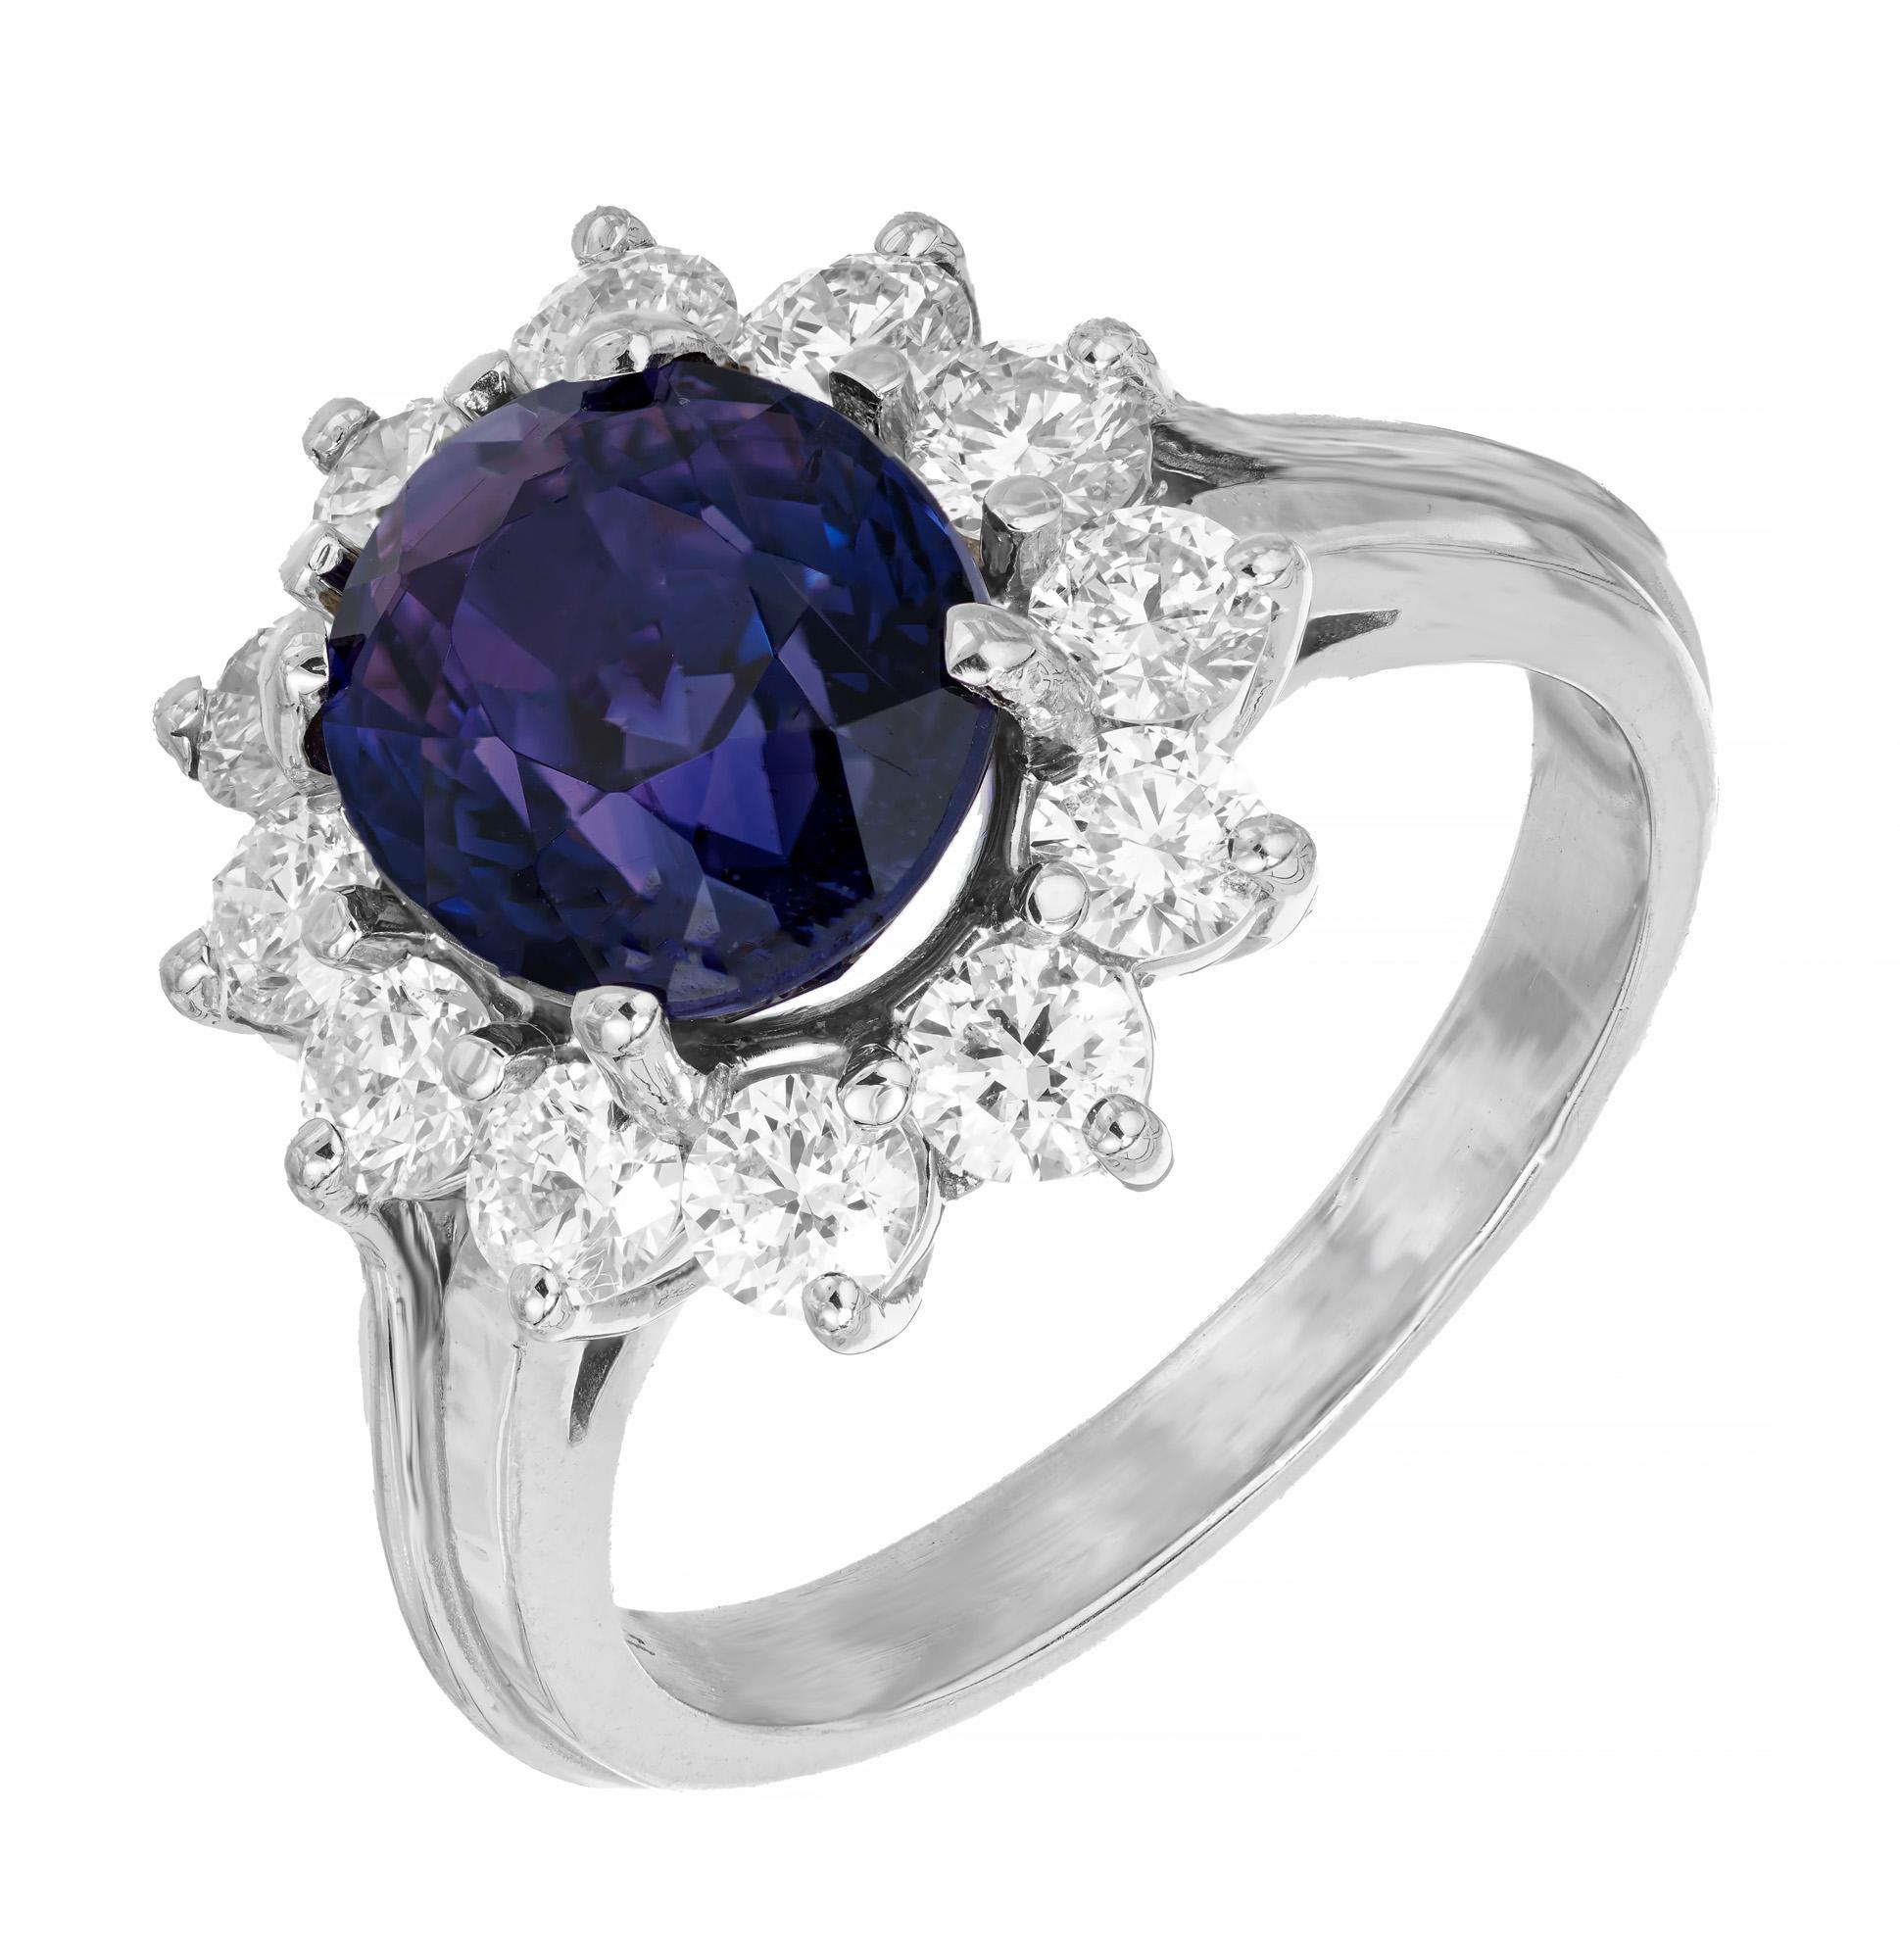 1950's oval sapphire diamond halo engagement ring. AGTA certified oval simple heat only, natural corundum center sapphire with a halo of 12 round ideal cut diamonds in a handmade 14k white gold wire setting. The Sapphire changes color from Purple